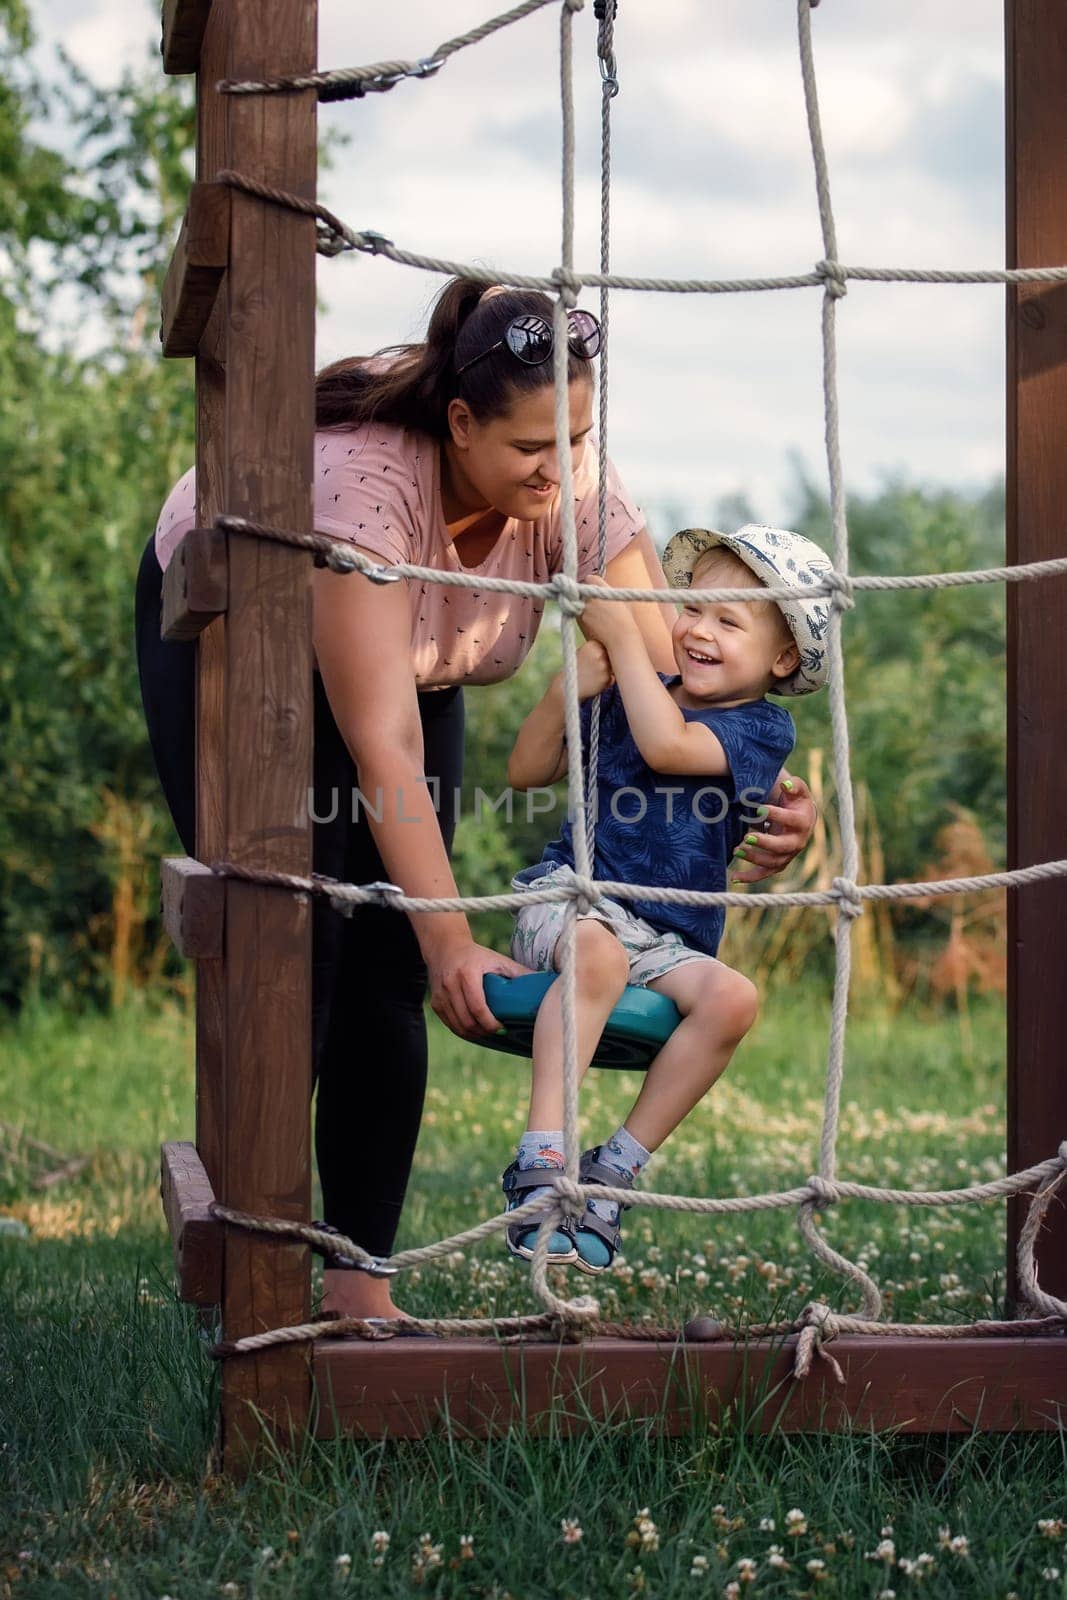 Mom has fun playing with her son on the ropes ladder in the garden playground.